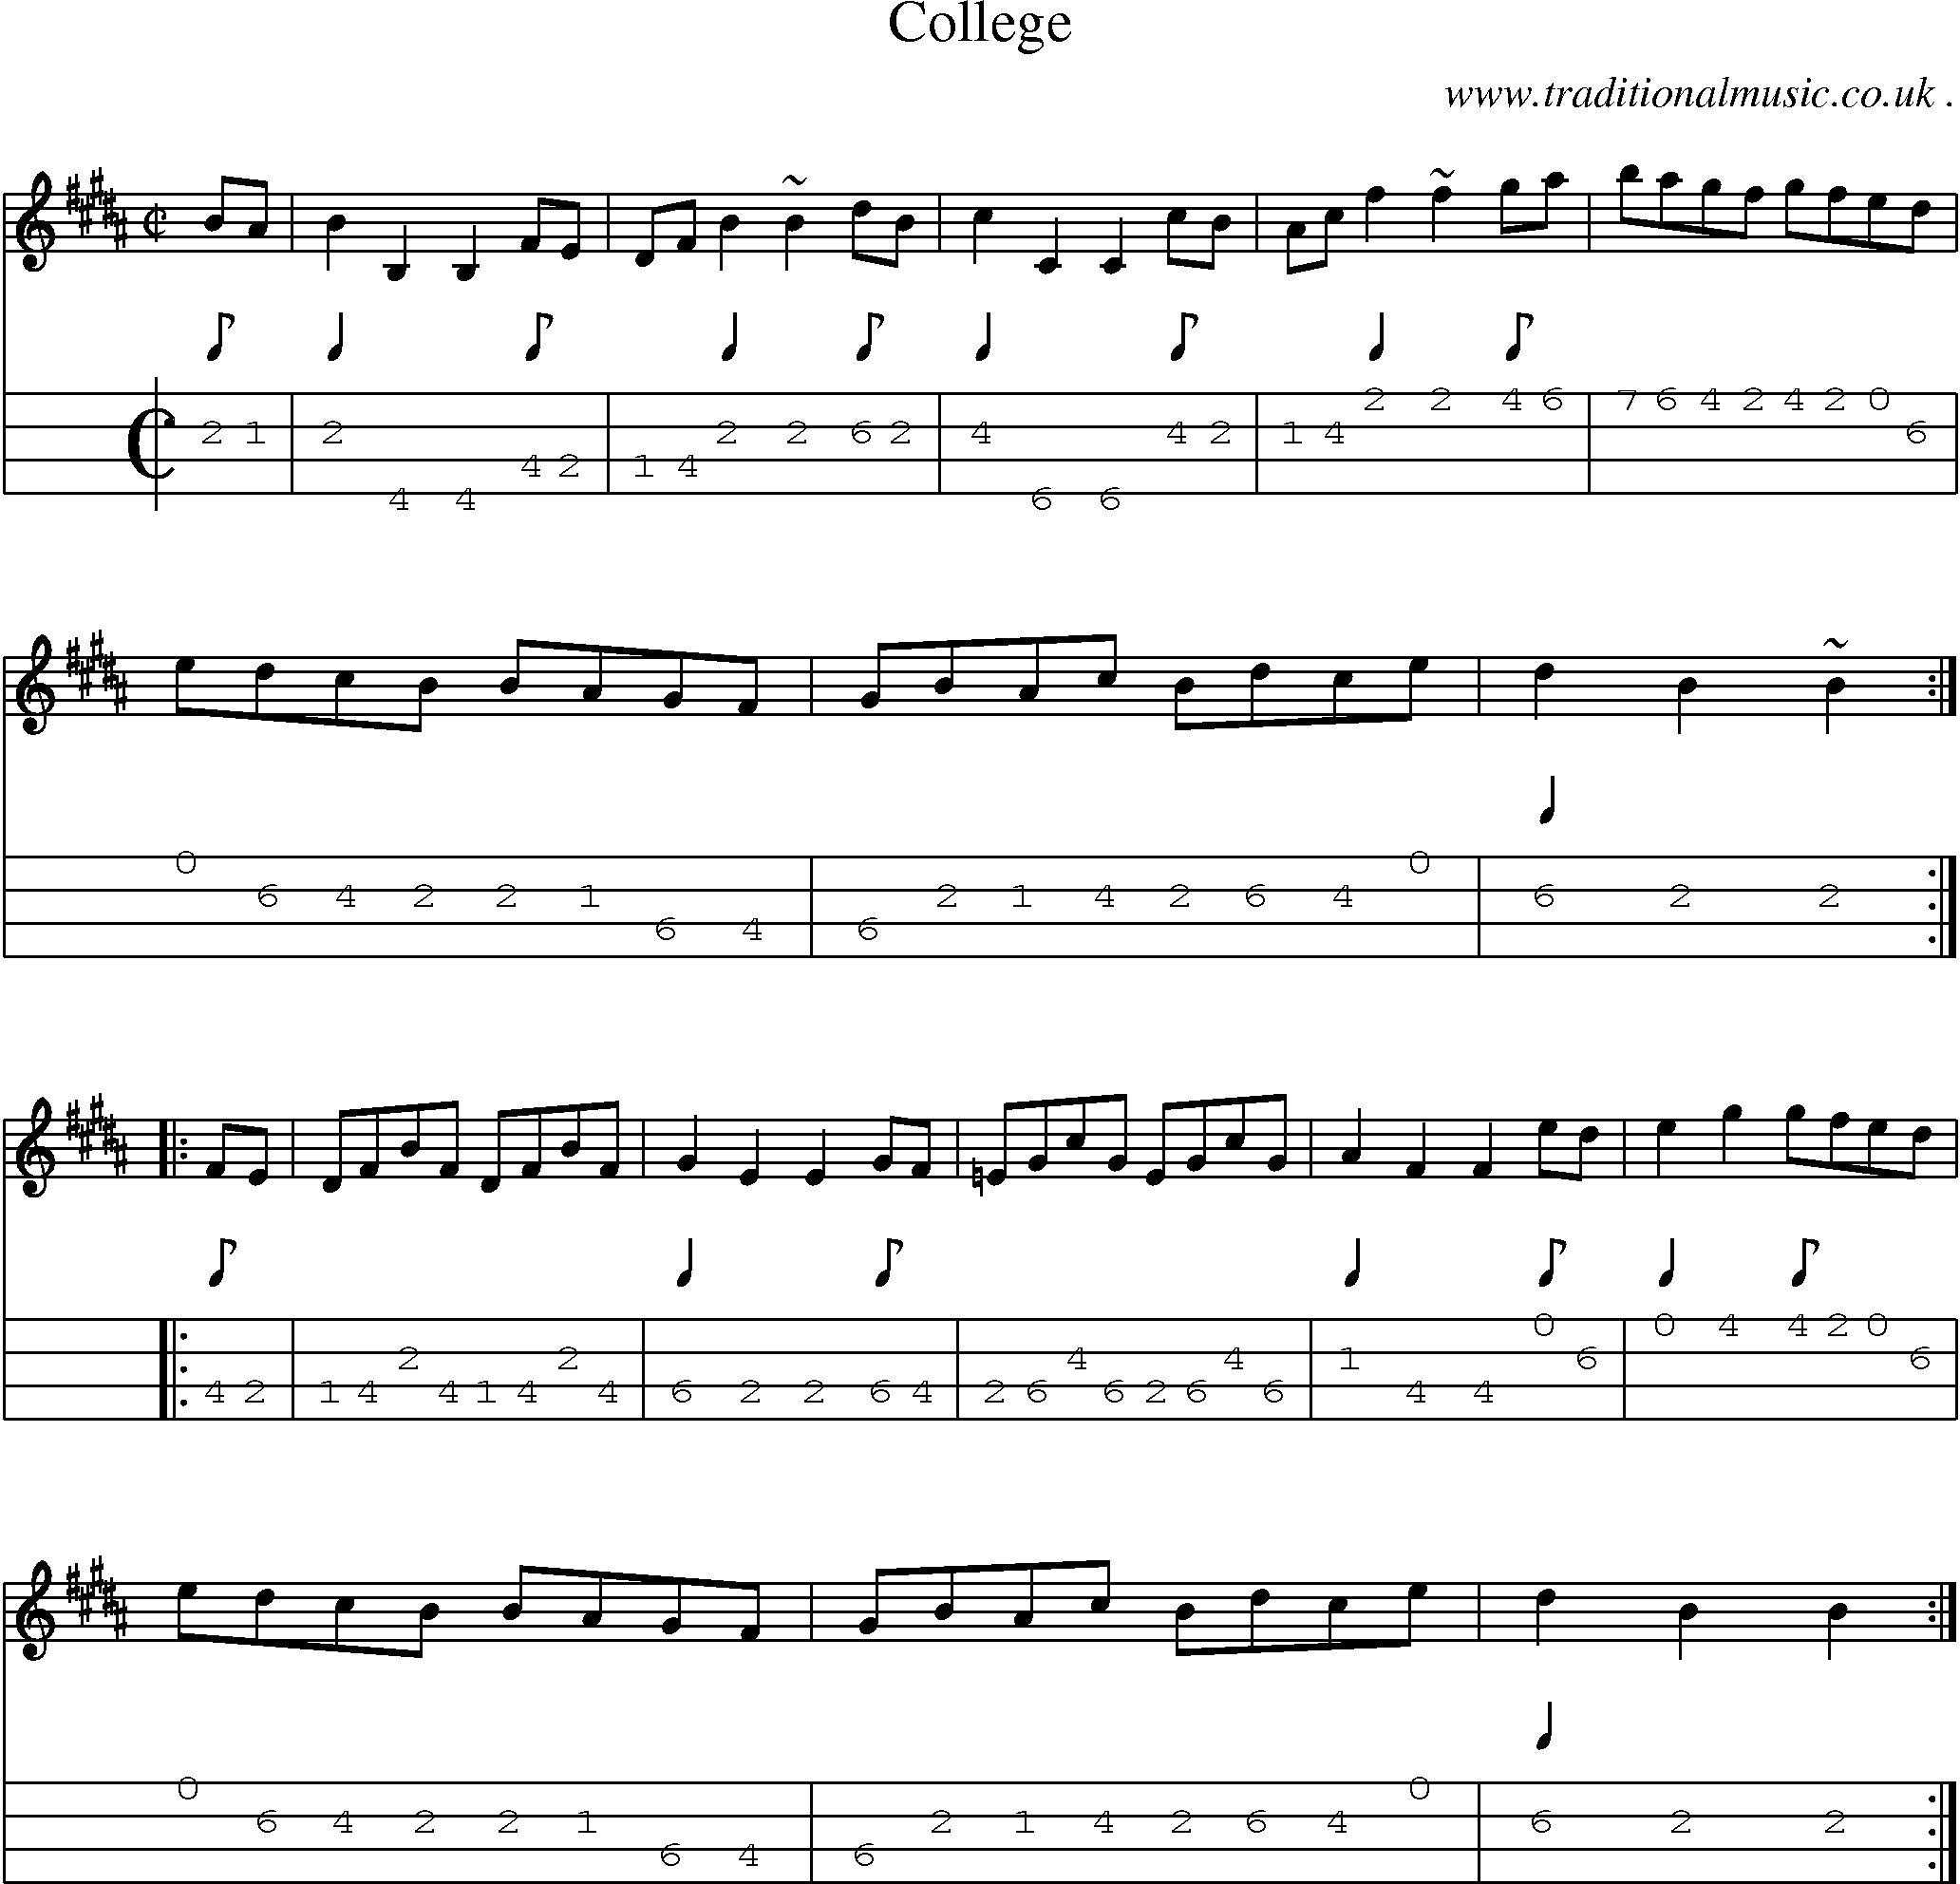 Sheet-music  score, Chords and Mandolin Tabs for College